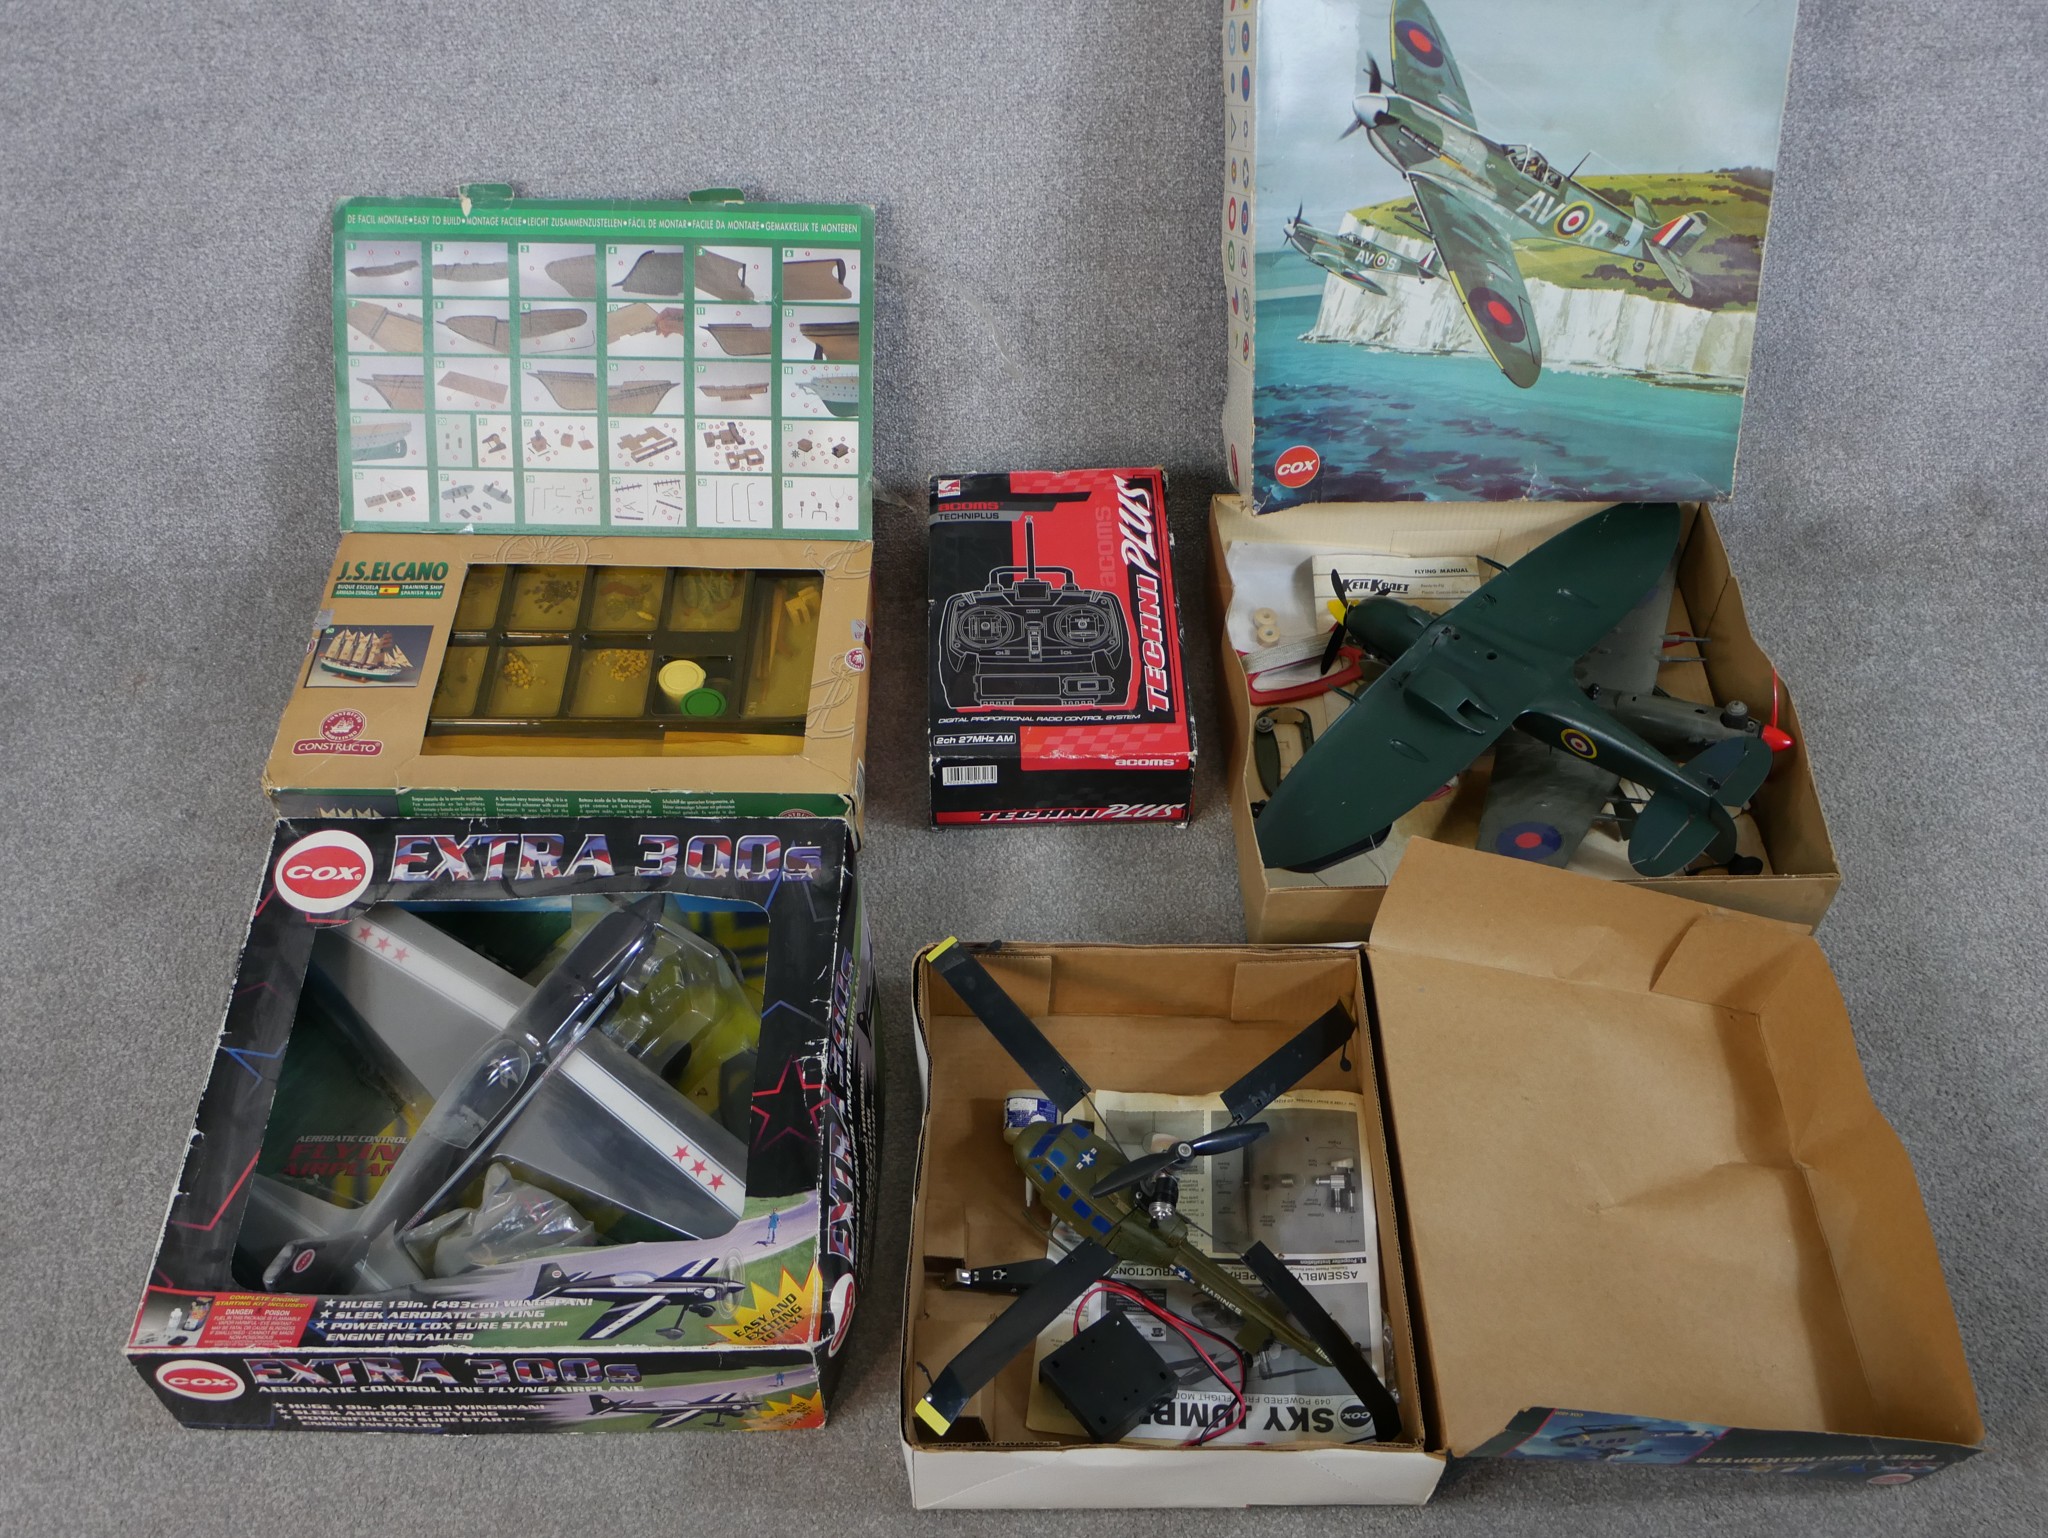 Three boxed model planes including a Cox 300s Extra, a Cox Sky Jumper helicopter and a Cox